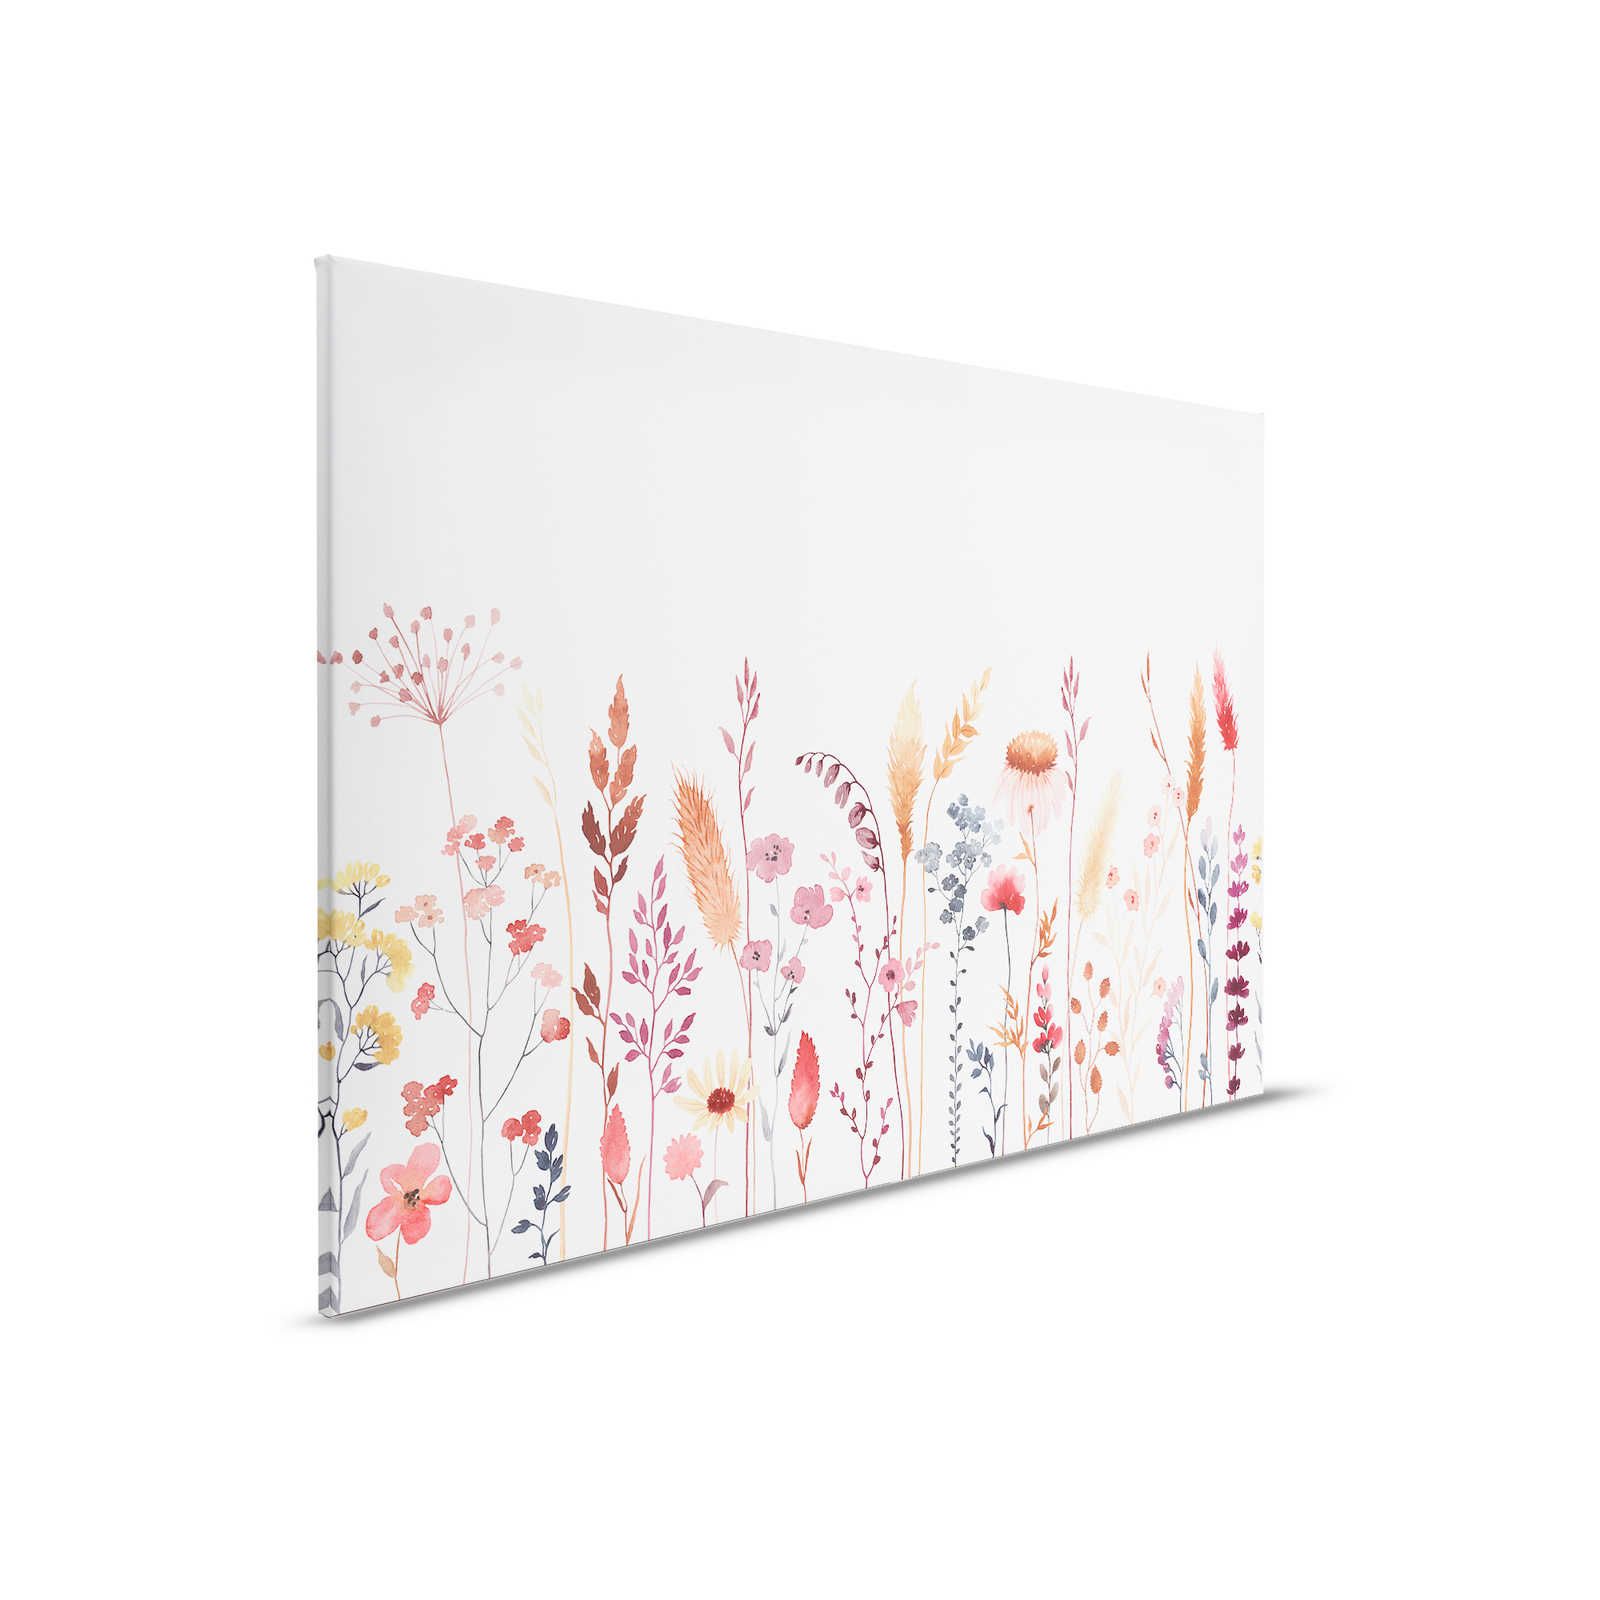         Canvas for children's room with leaves and grasses - 90 cm x 60 cm
    